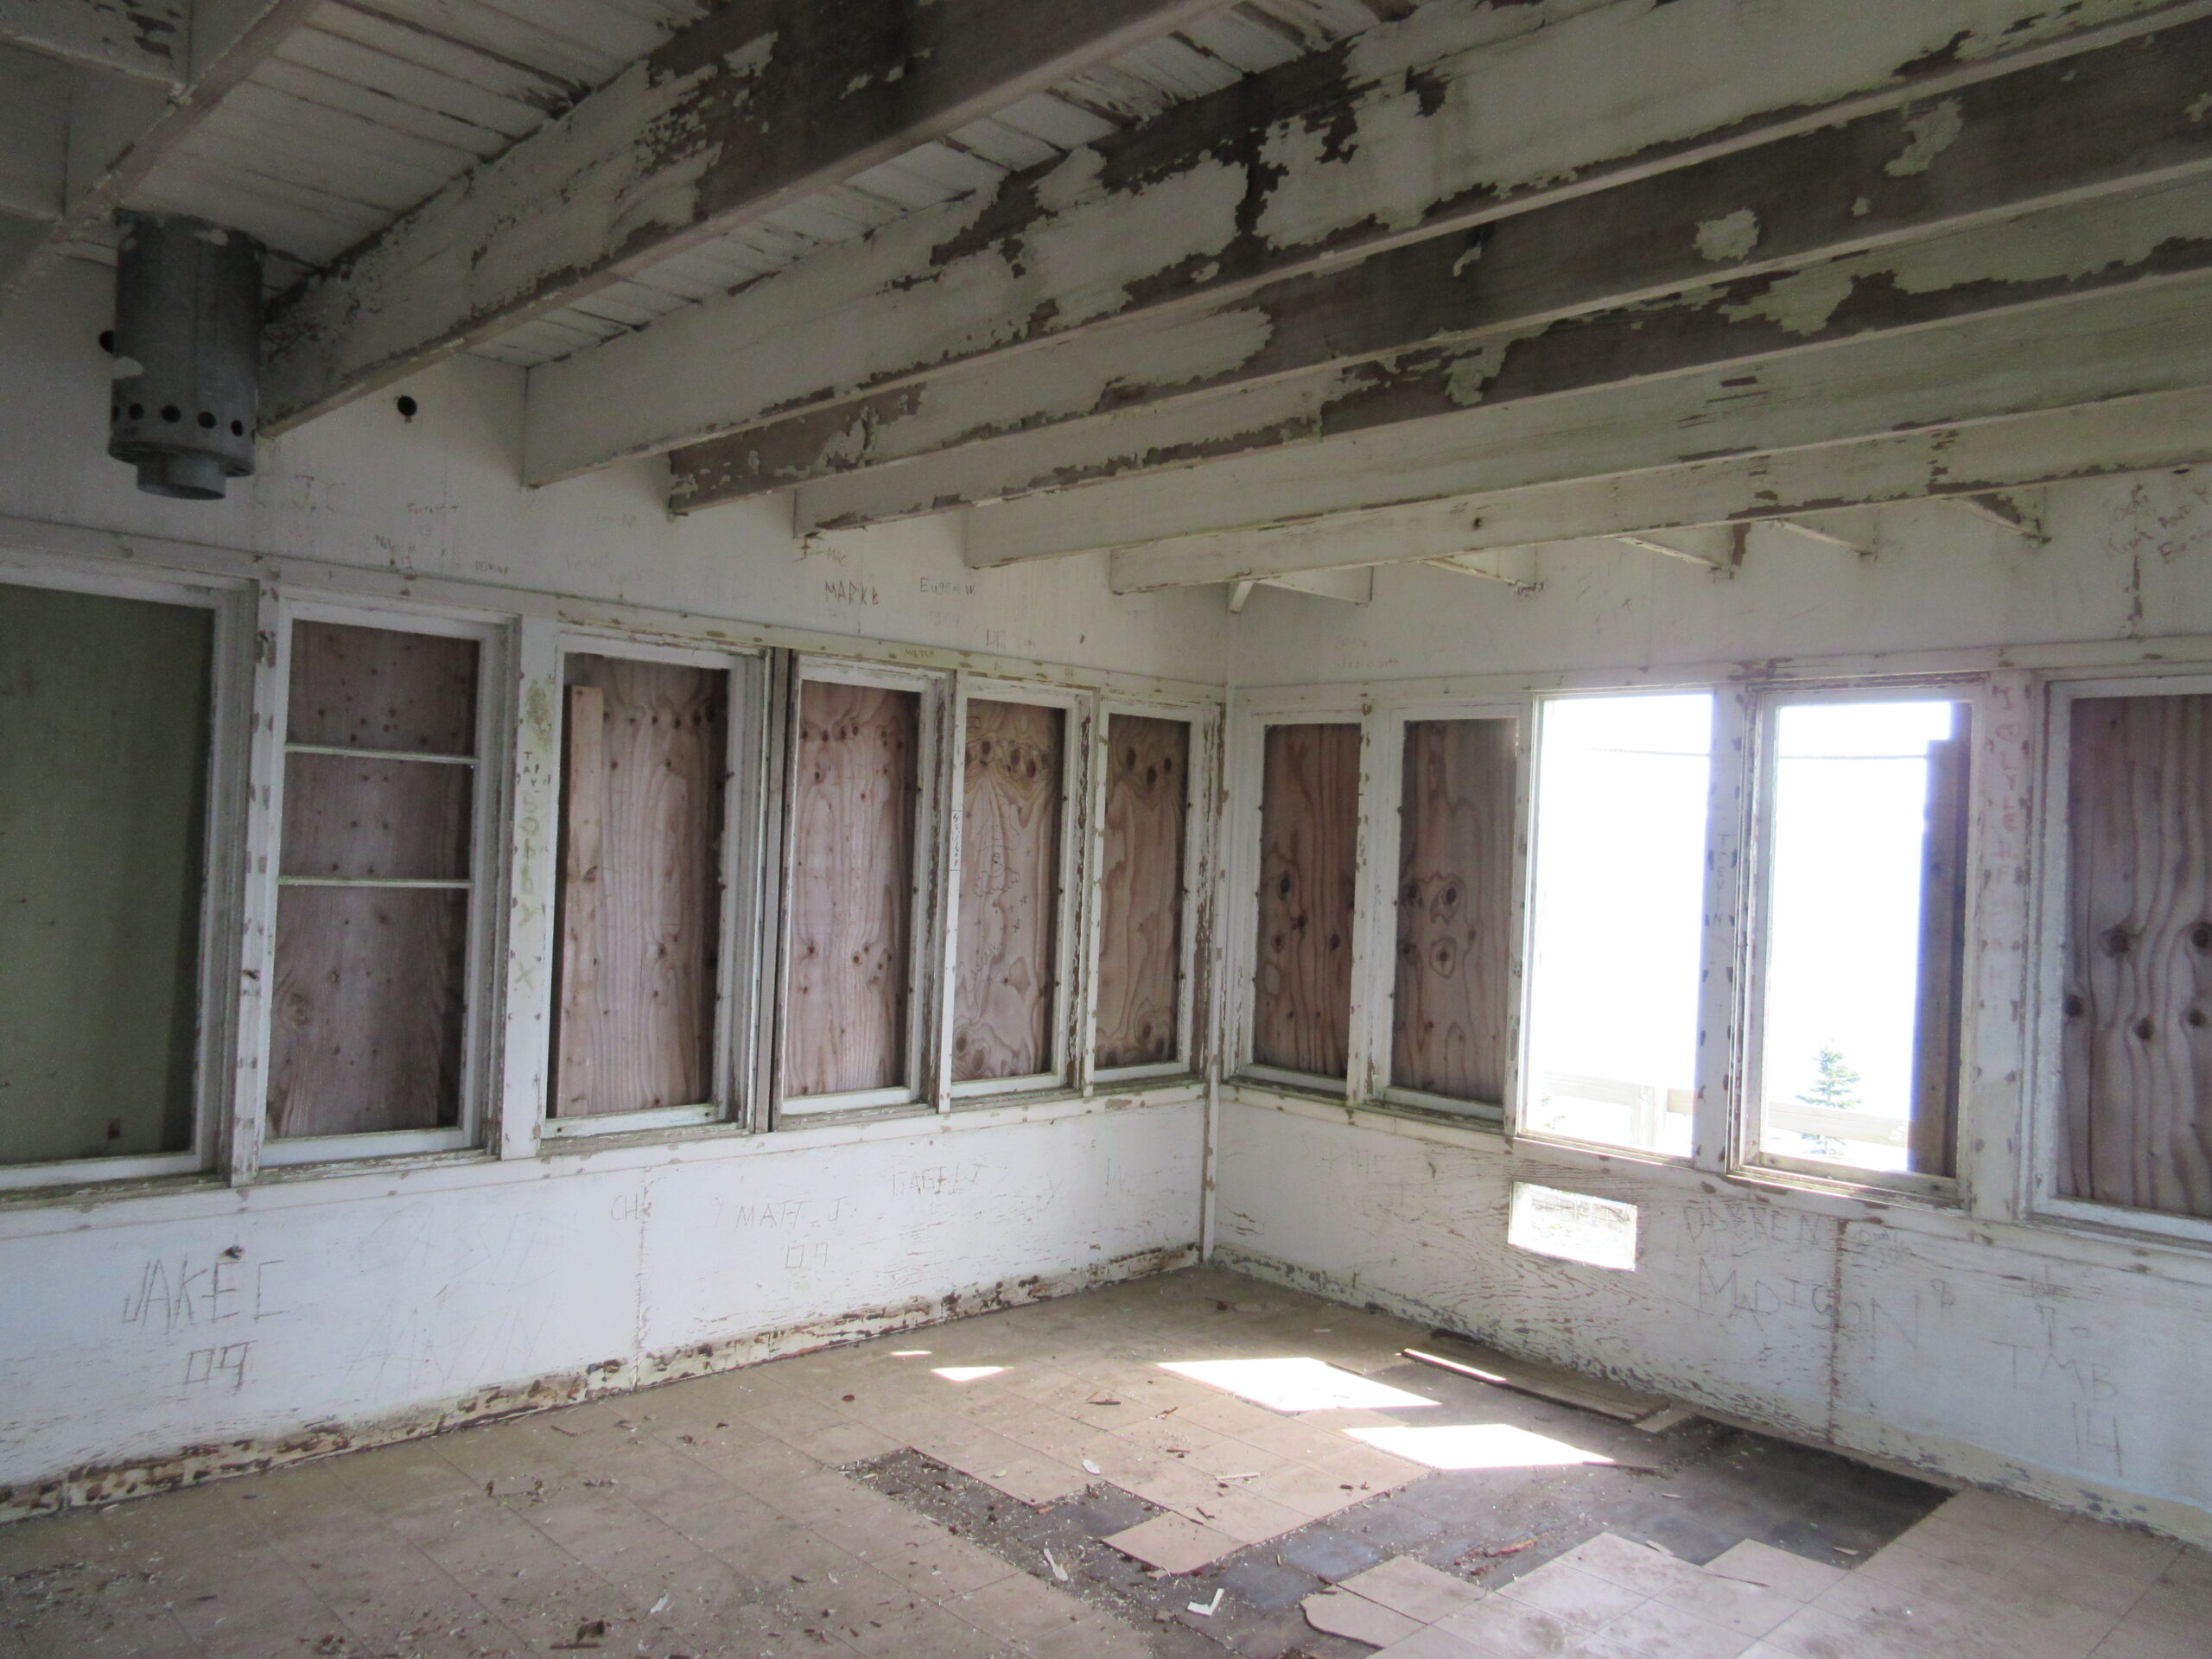 INside historic lookout tower